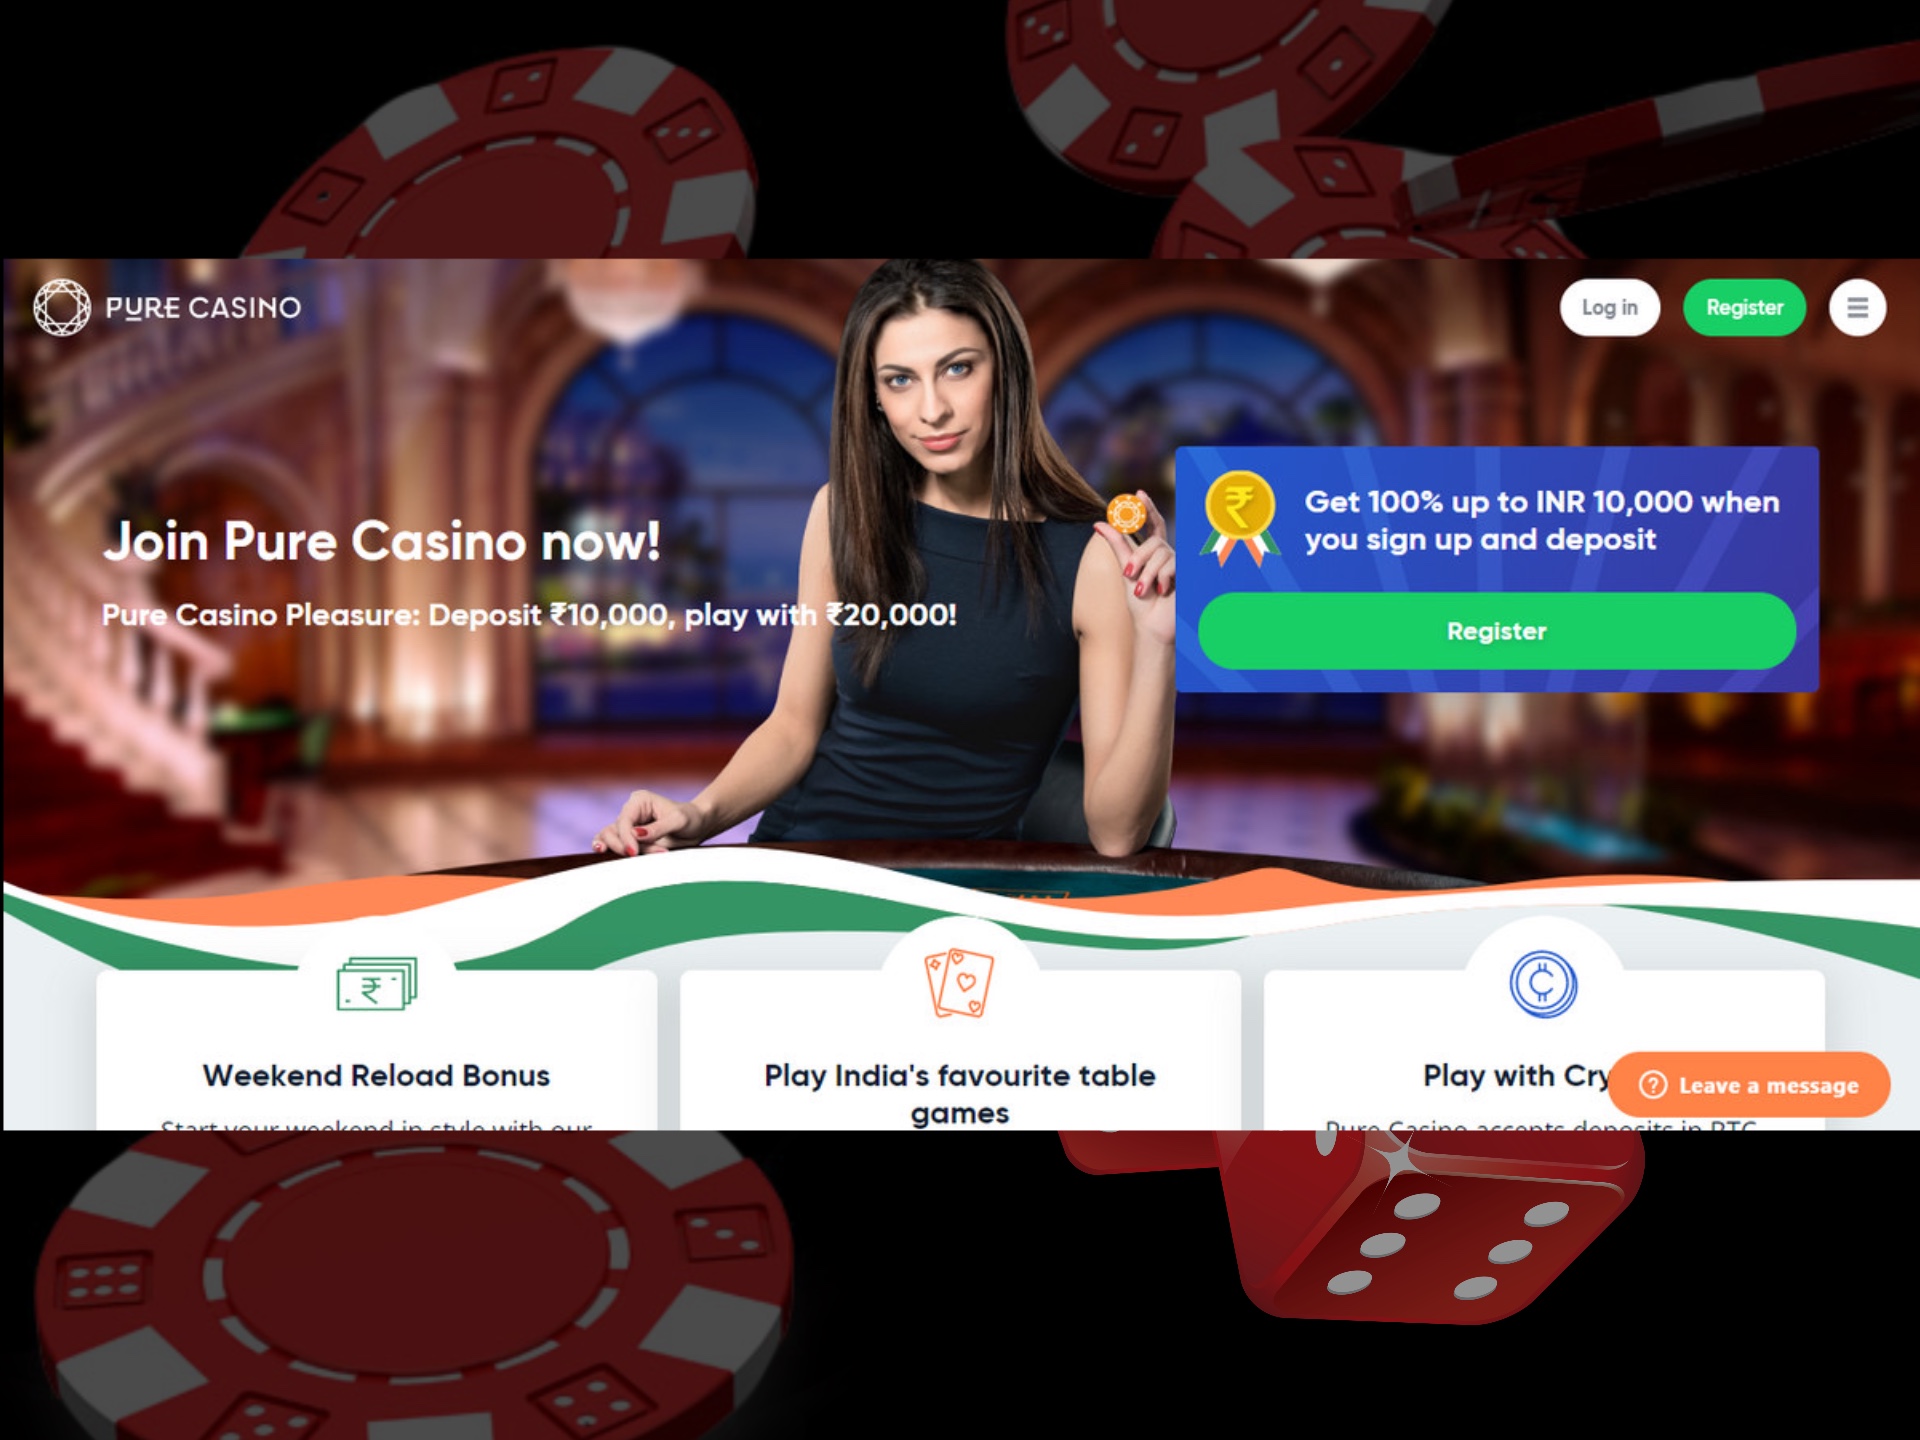 Sign up for an online casino, make your first deposit and get a deposit bonus.